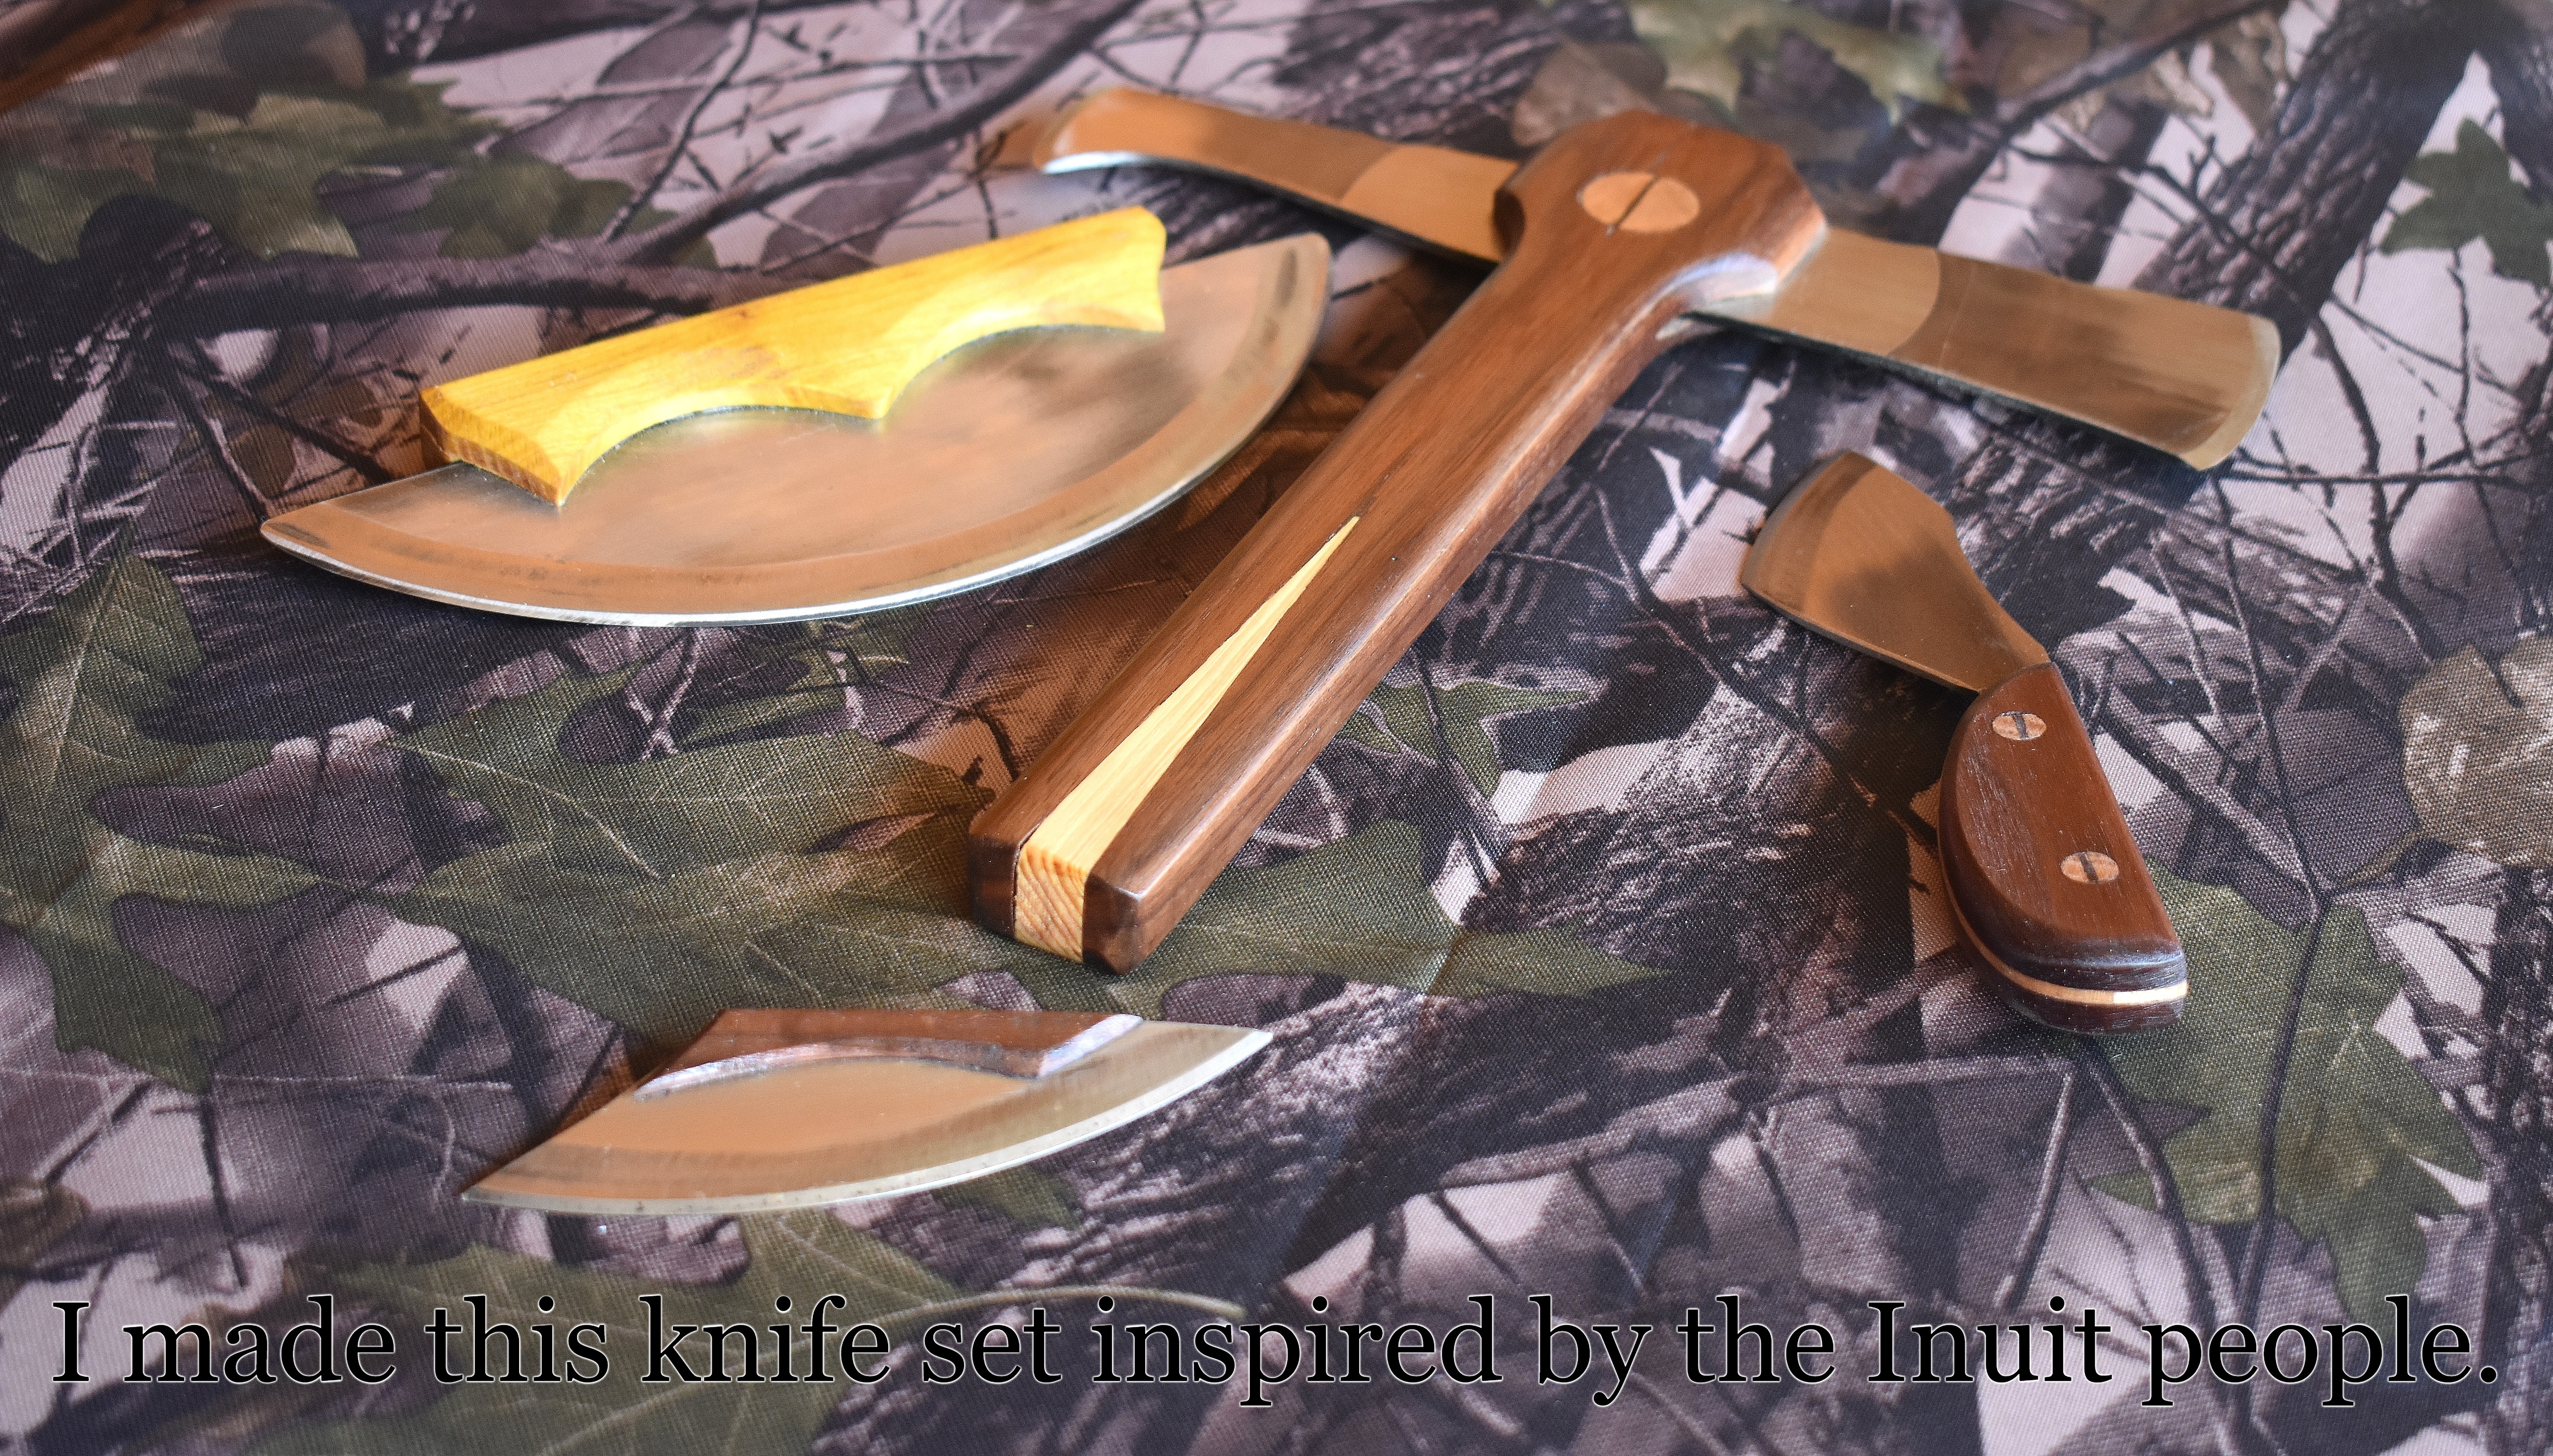 knifes inspired by the Inuit people | I made this knife set inspired by the Inuit people. | image tagged in inuit people,knifes | made w/ Imgflip meme maker